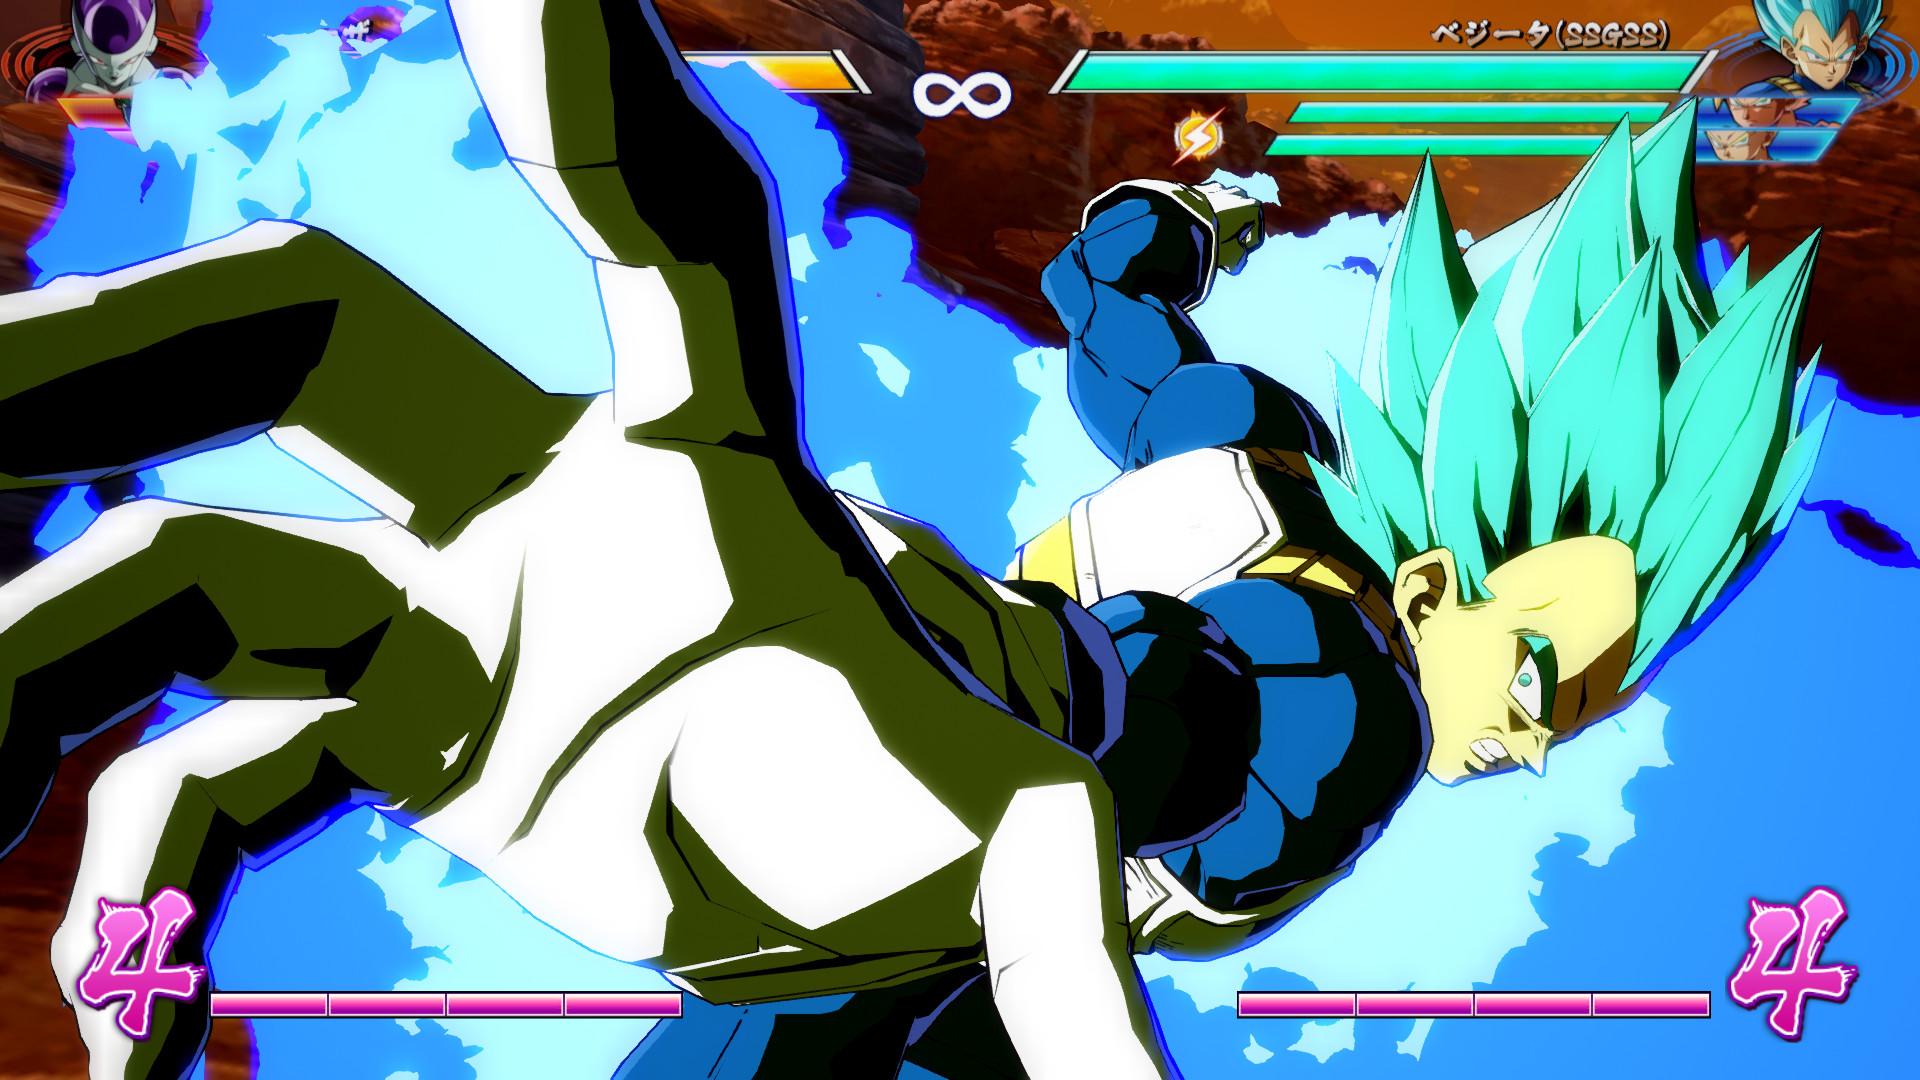 dragon ball fighterz pc free download full version